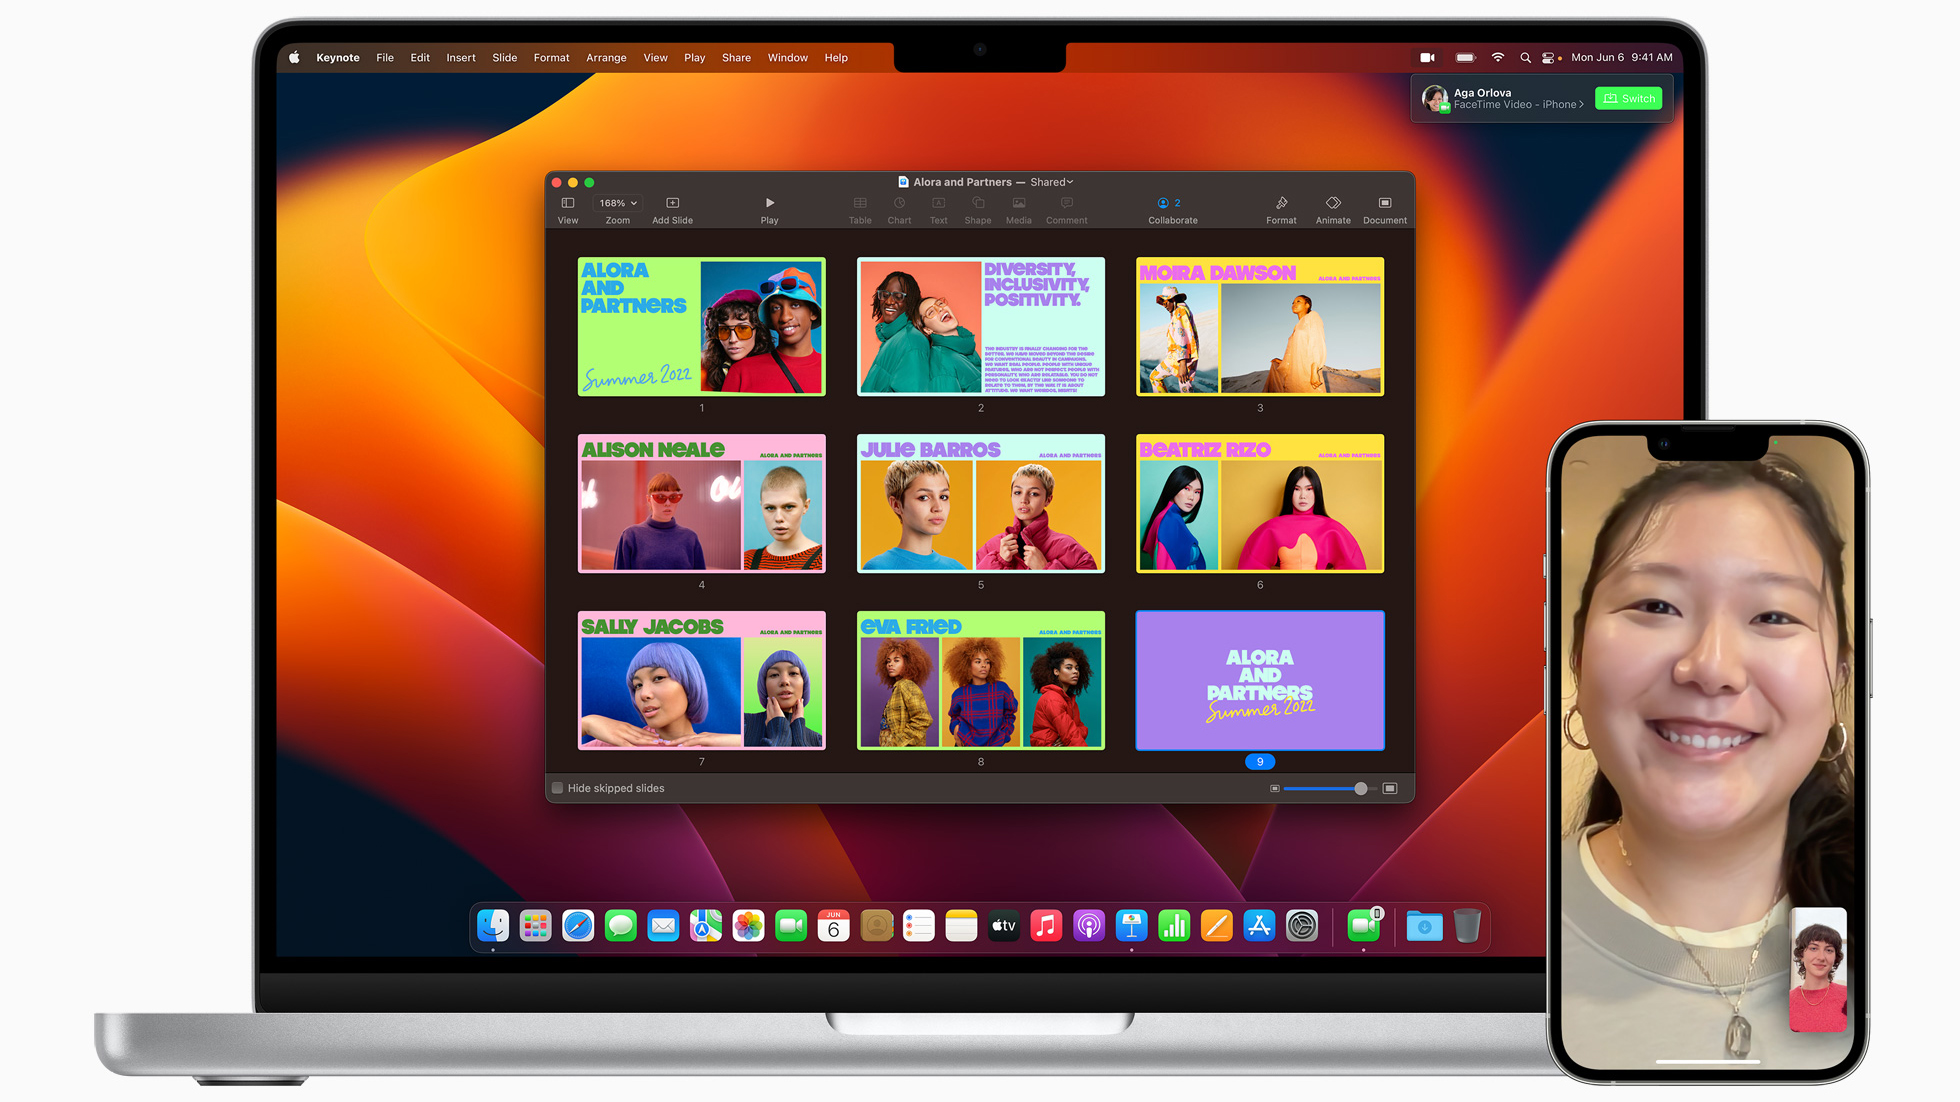 5 macOS Ventura features that will supercharge your productivity